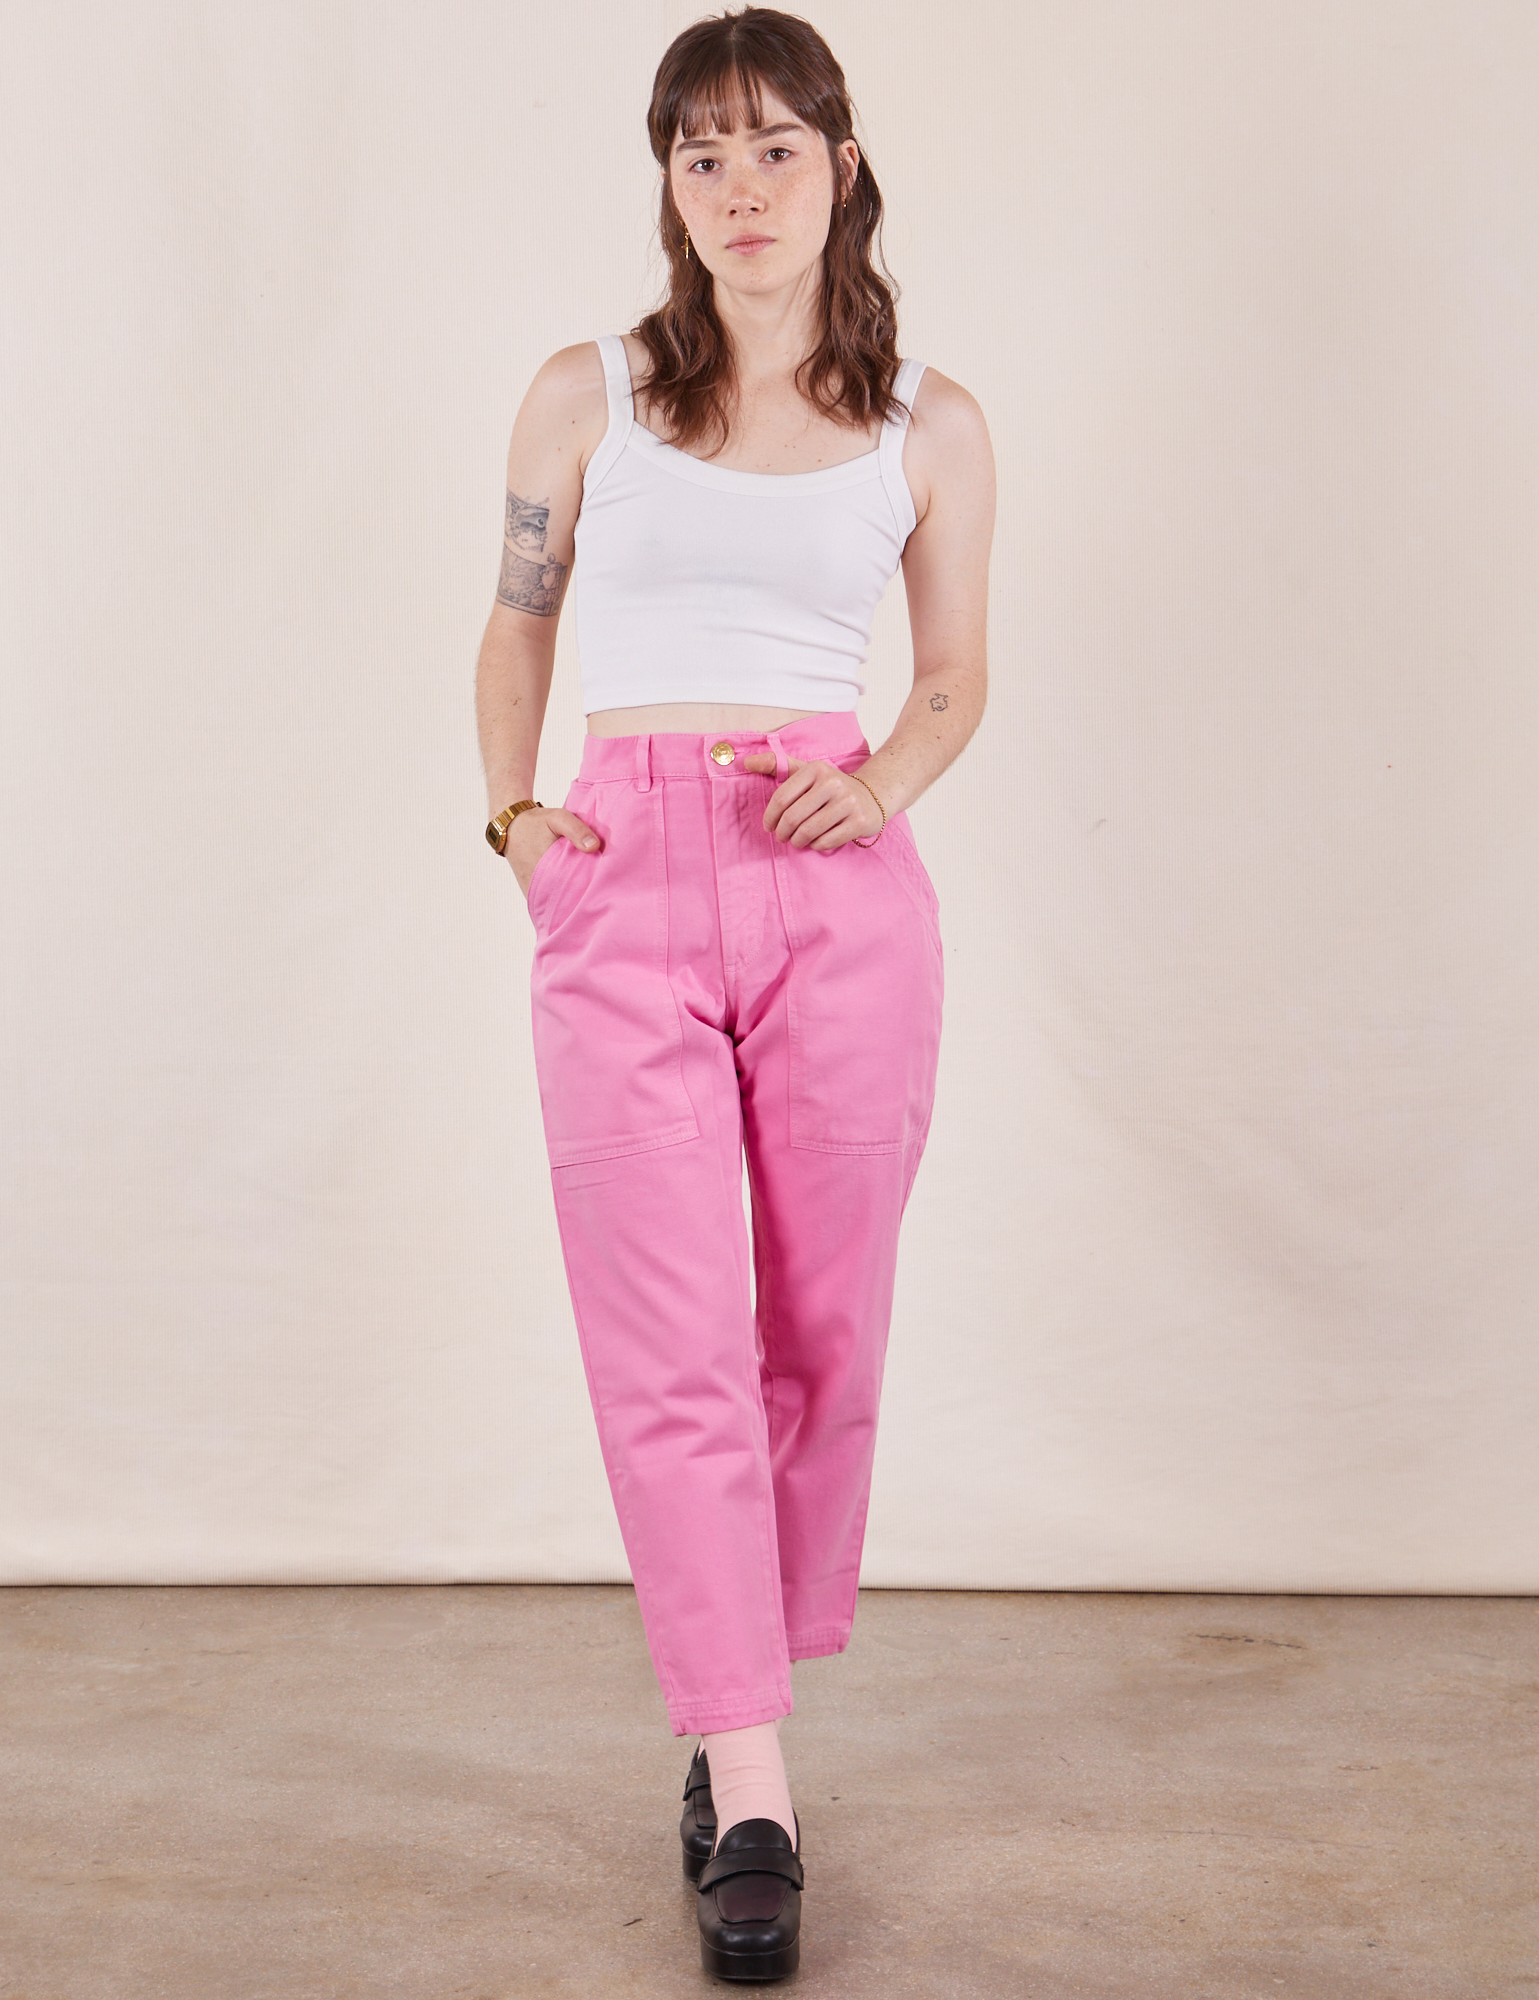 Hana is 5&#39;3&quot; and wearing XXS Petite Pencil Pants in Bubblegum Pink paired with vintage off-white Cropped Cami